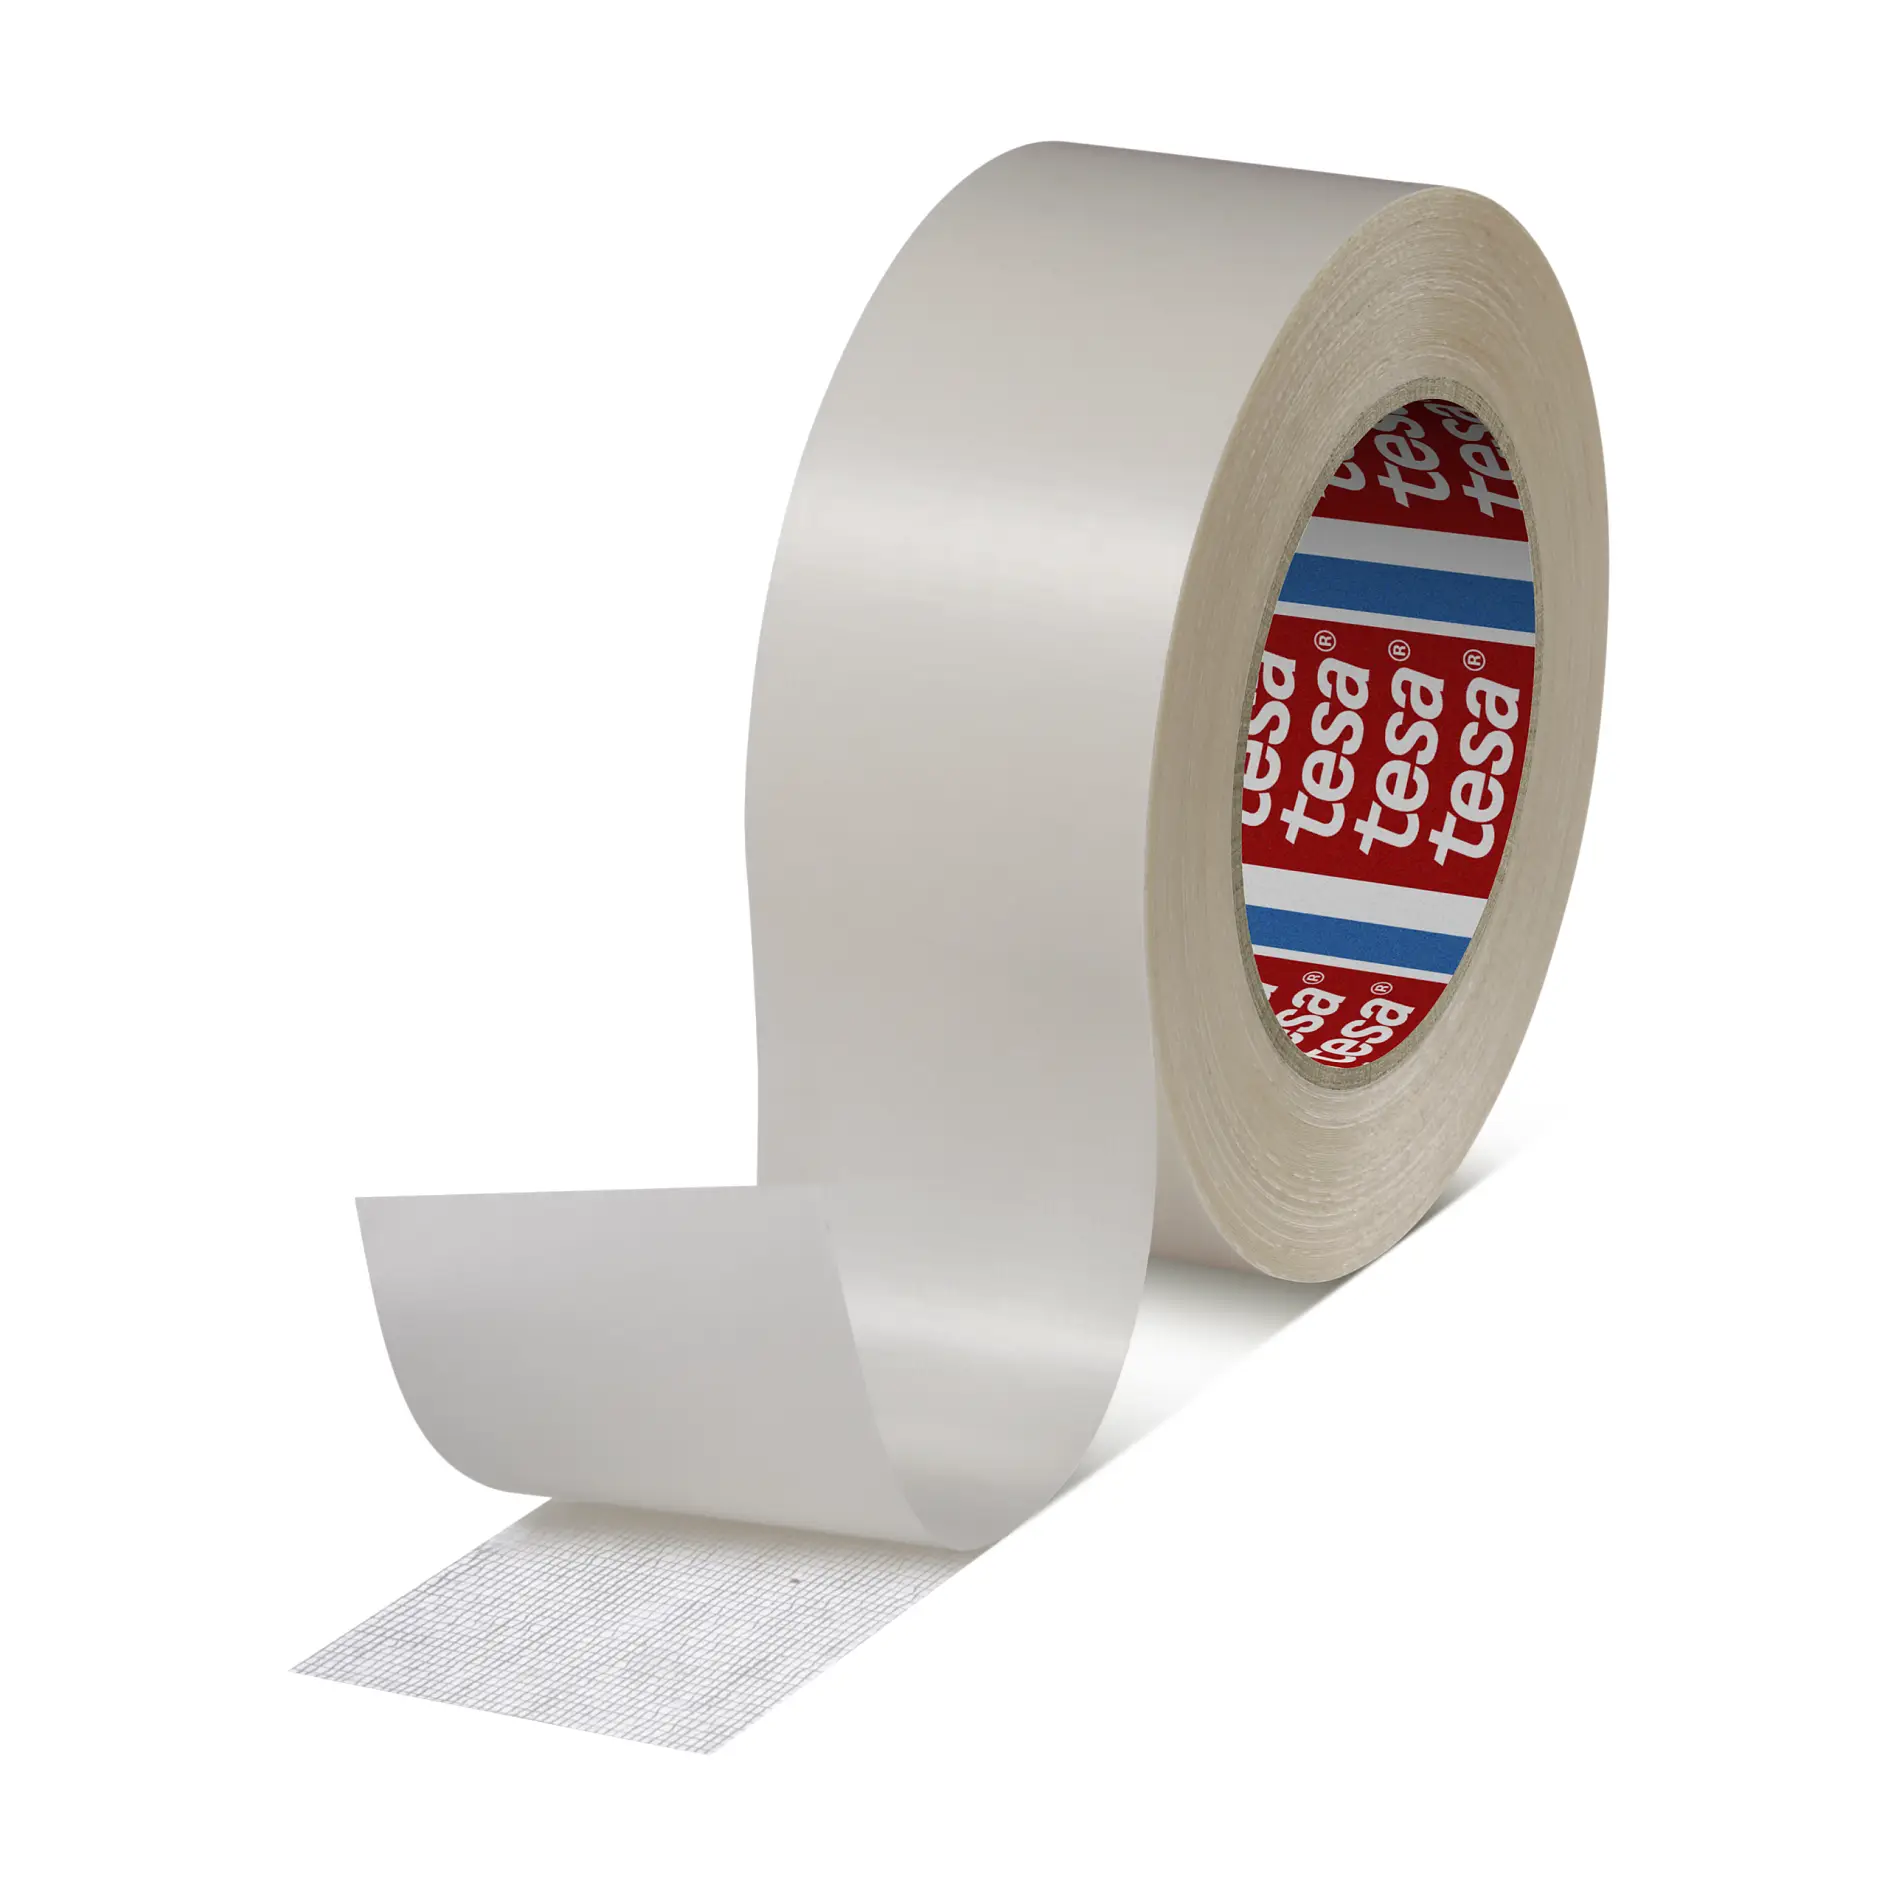 tesa-51960-carpet-laying-tape-double-sided-removable-white-519600000200-pr